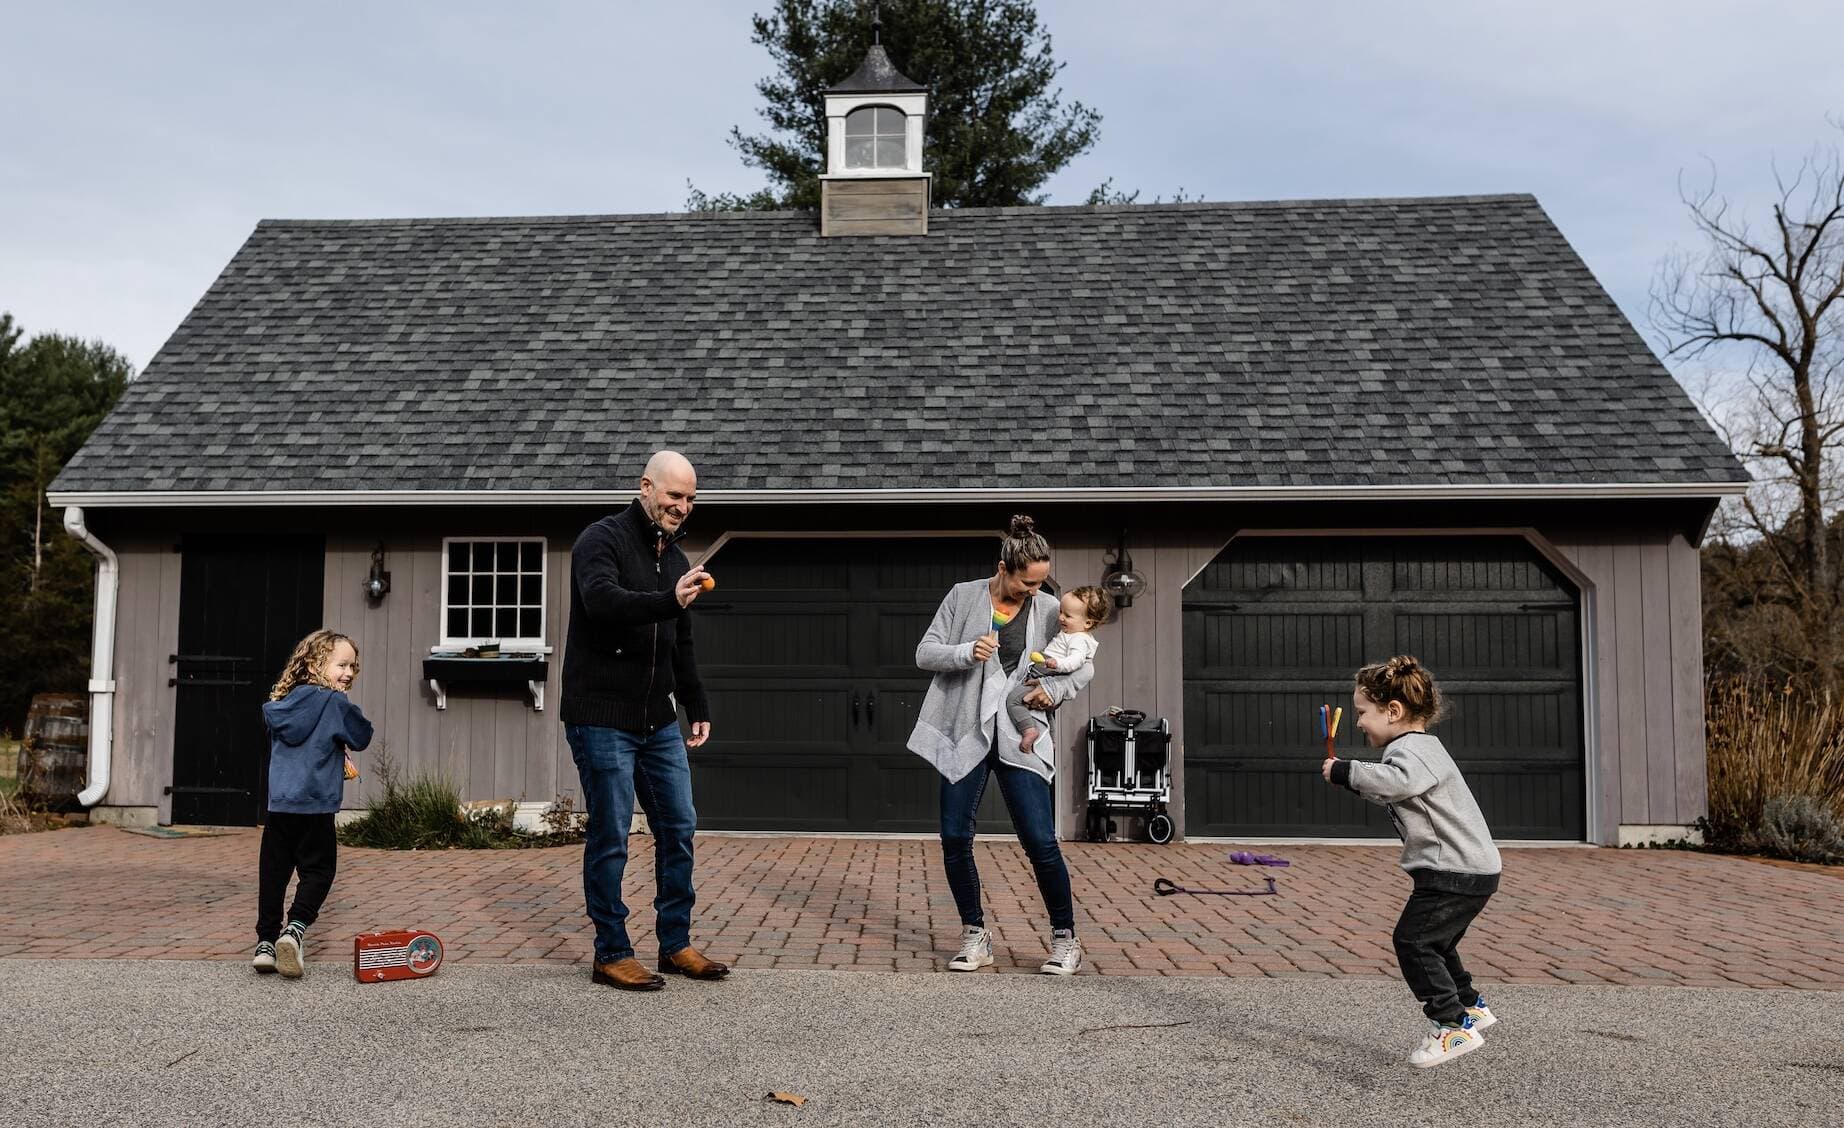 Boston Marathon bombings survivor Meghan Zipin plays with her husband and children in their driveway. (Courtesy Katie Goodall)